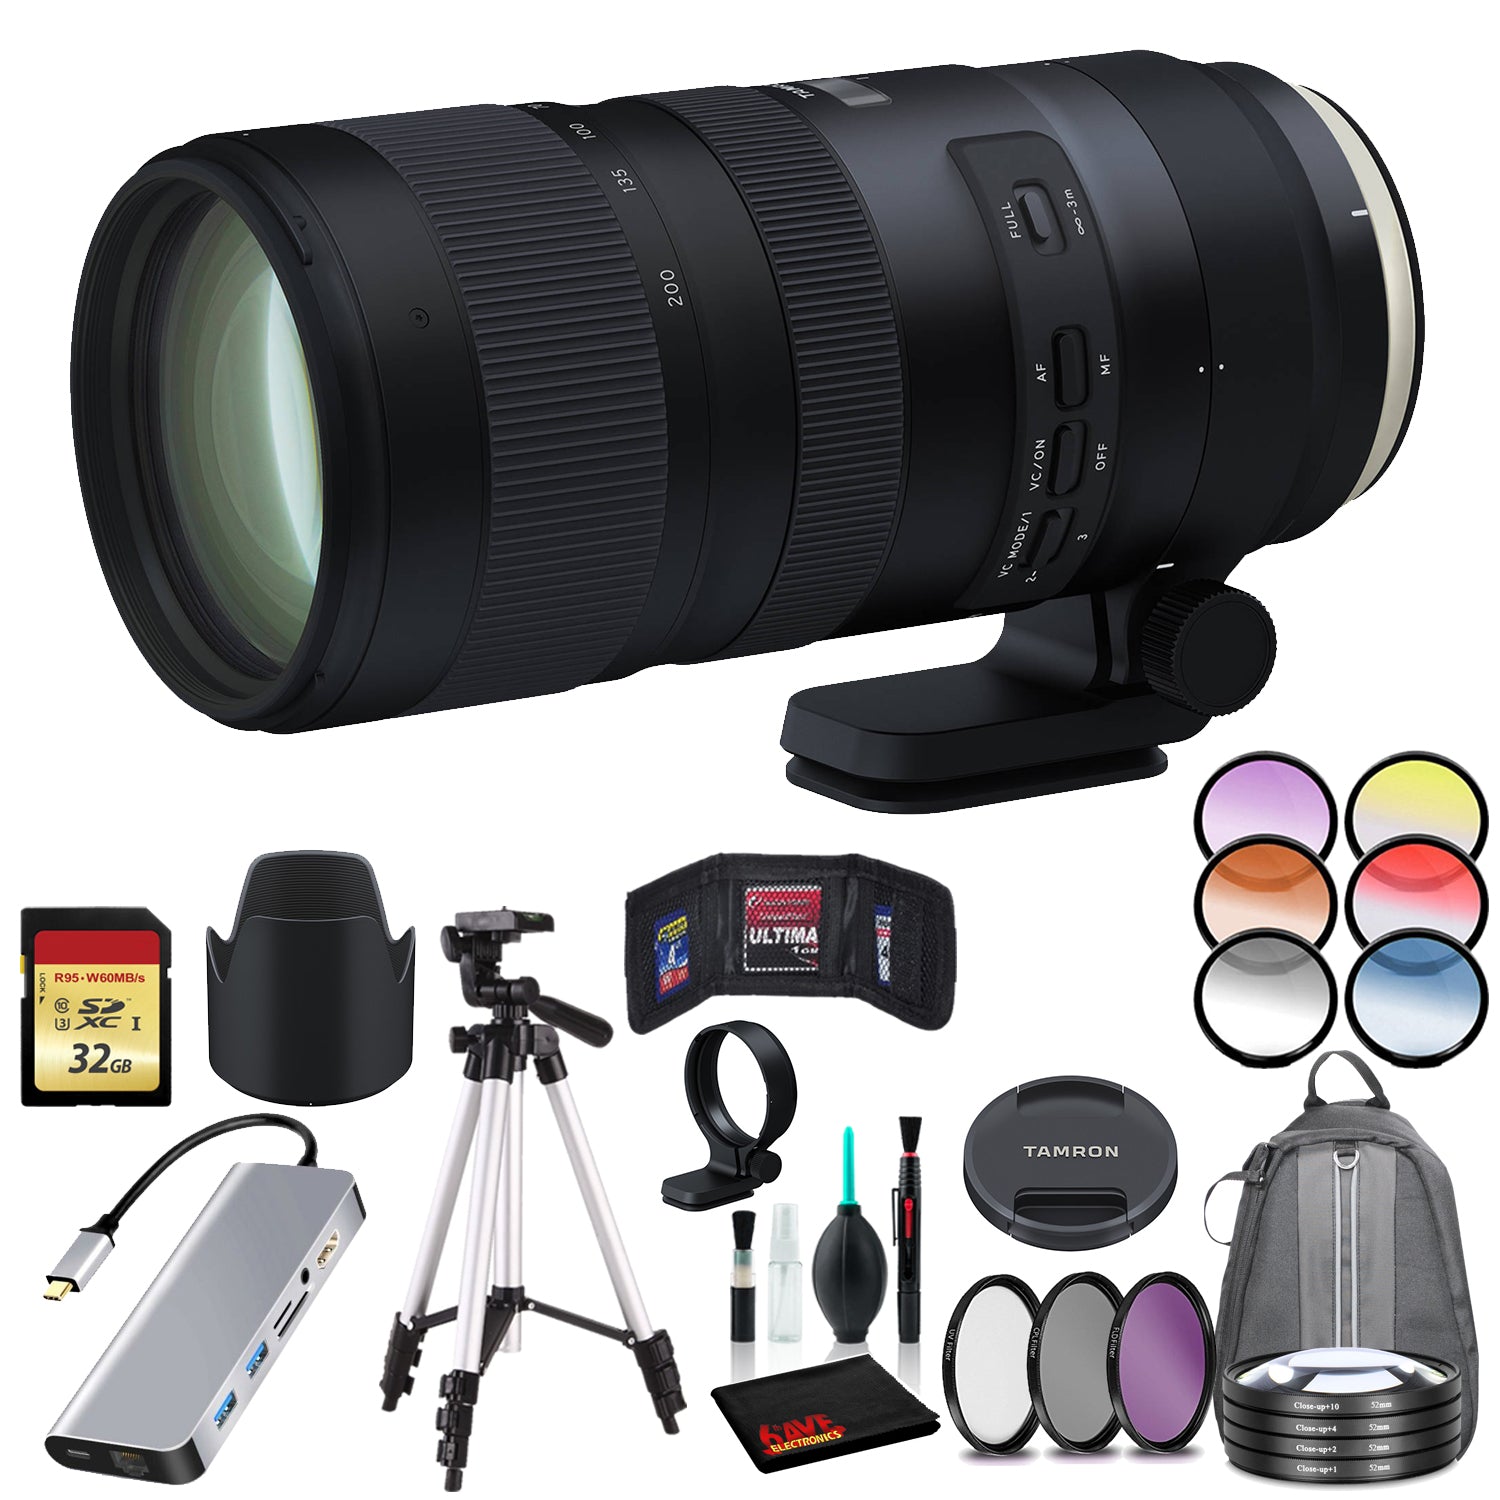 Tamron SP 70-200mm f/2.8 Di VC USD G2 Lens for Canon EF Includes Cleaning Kit, Memory Kit, Tripod, and Filter Bundle